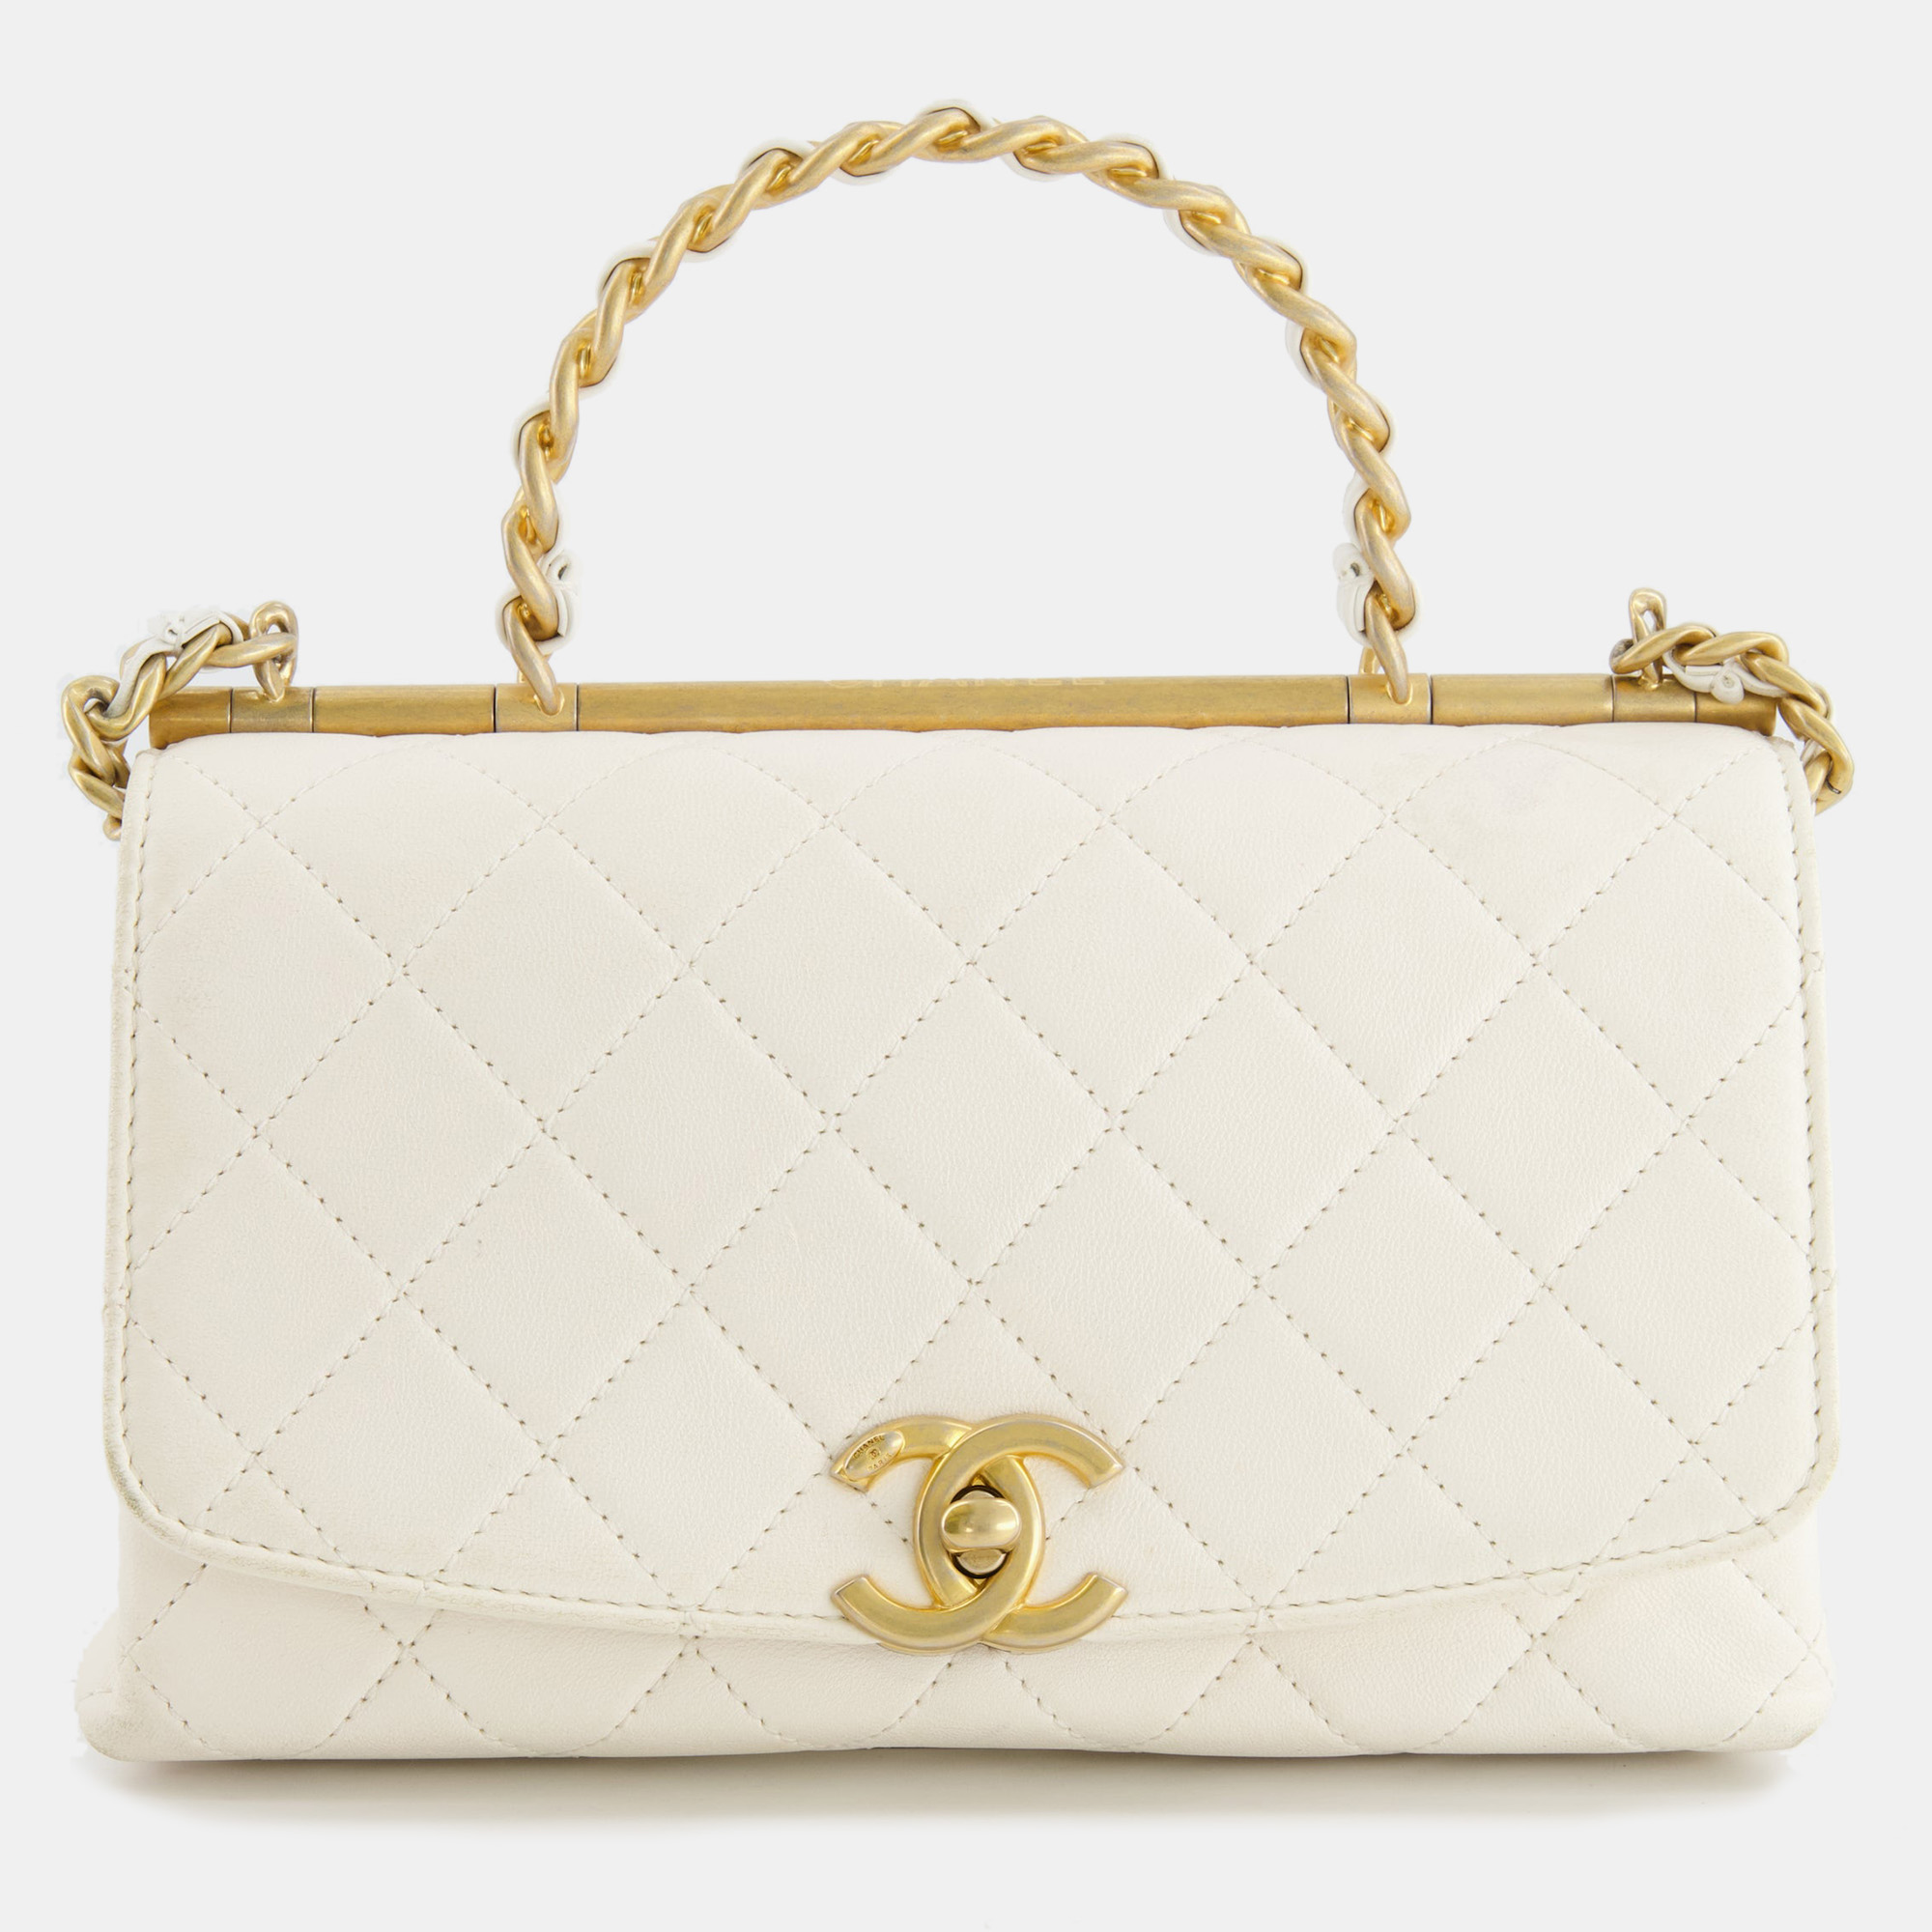 Chanel white lambskin leather small flap bag with brushed gold chain top handle